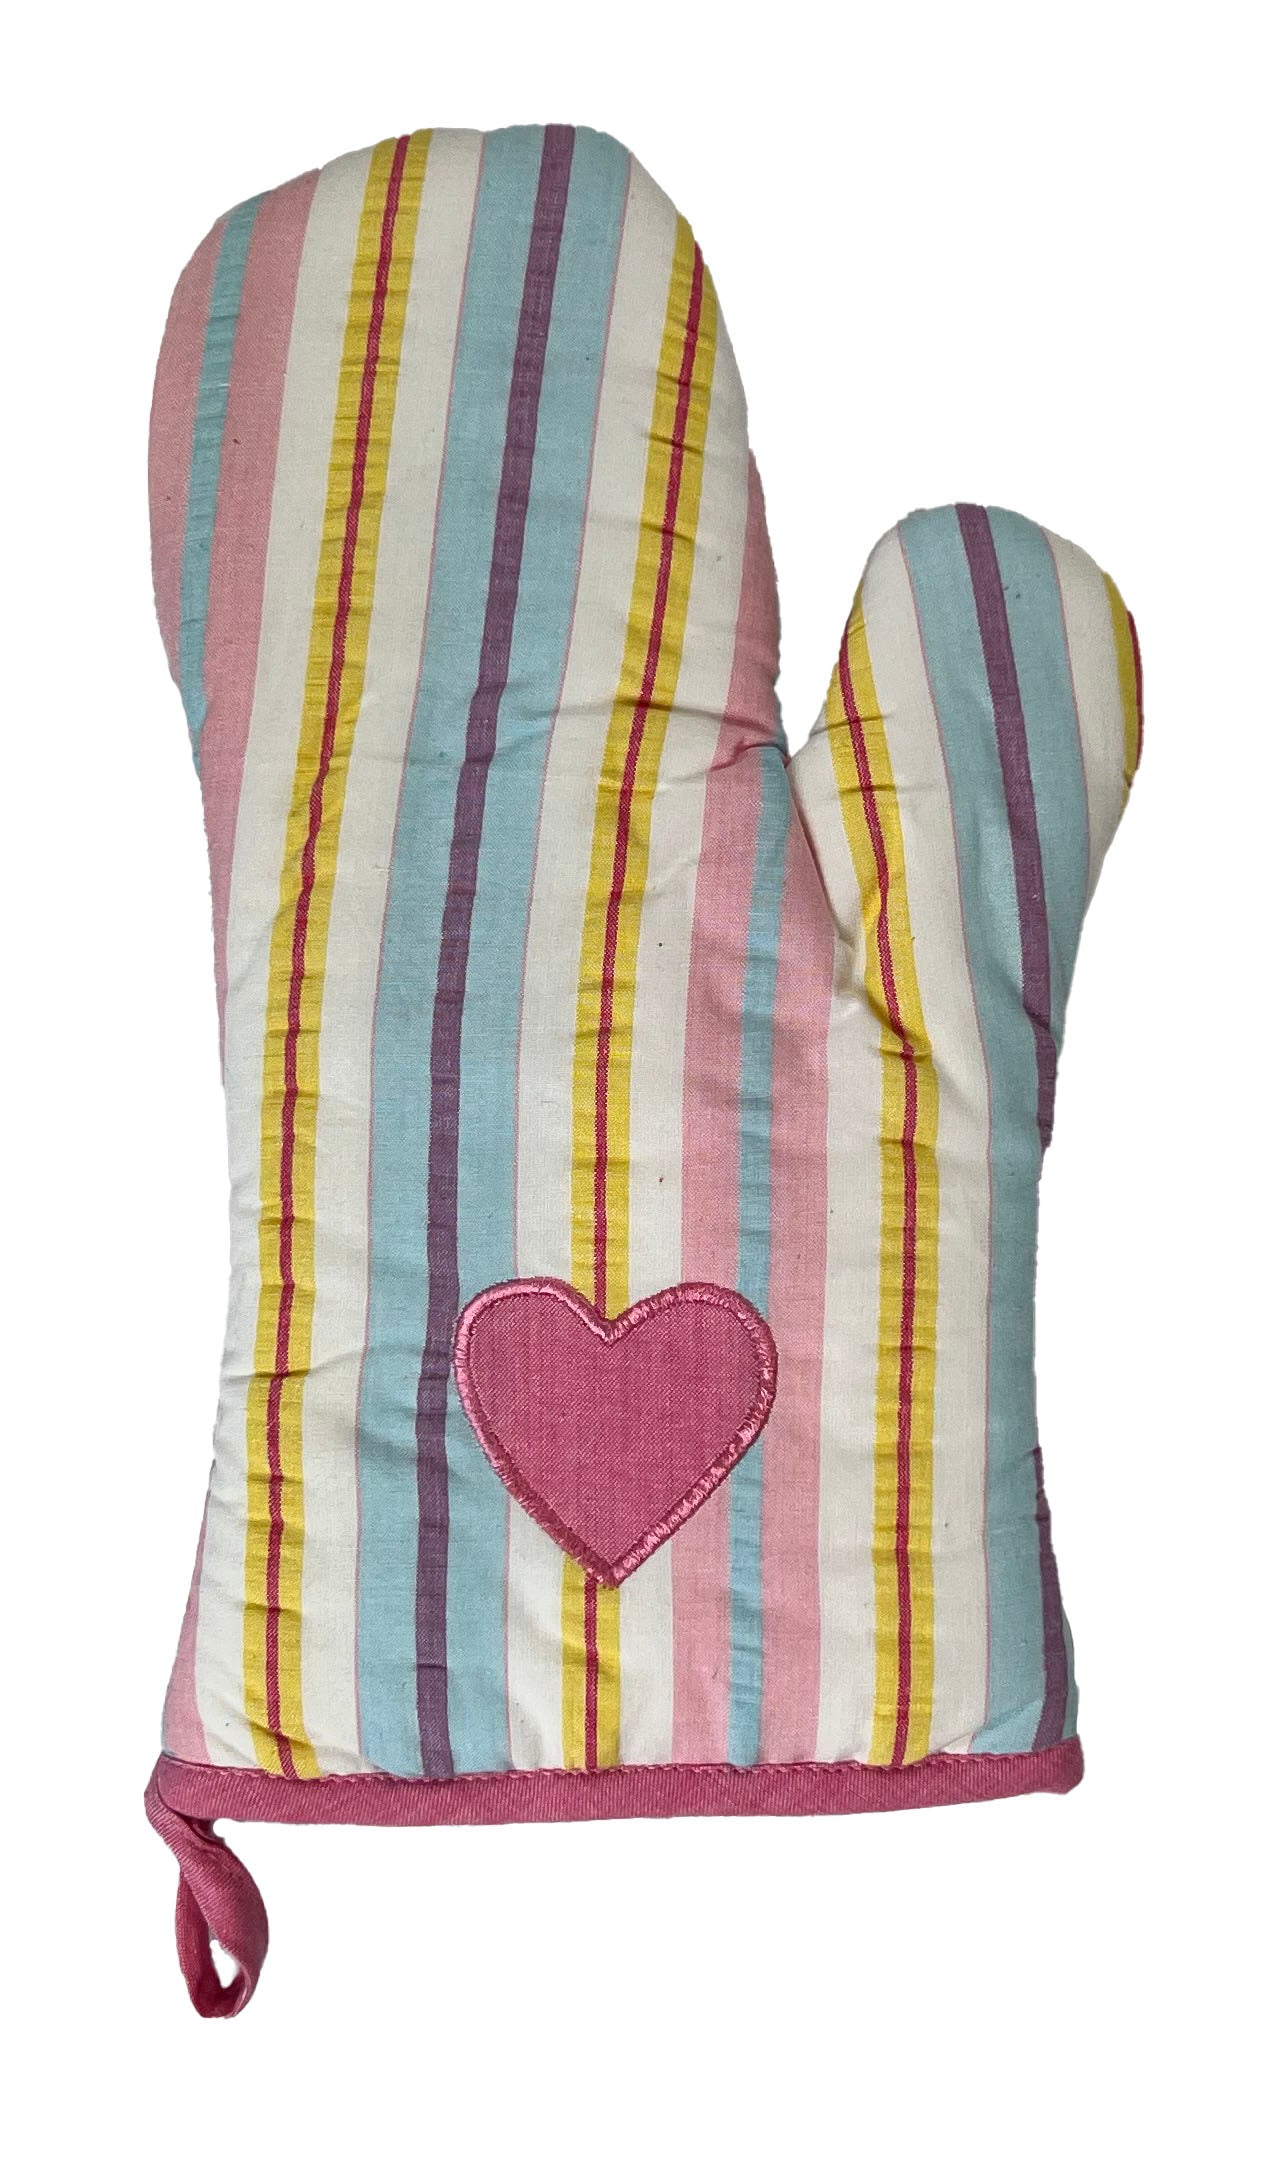 Blue, pink and yellow pastel striped oven mitt with pink heart motif from Sterck & Co.